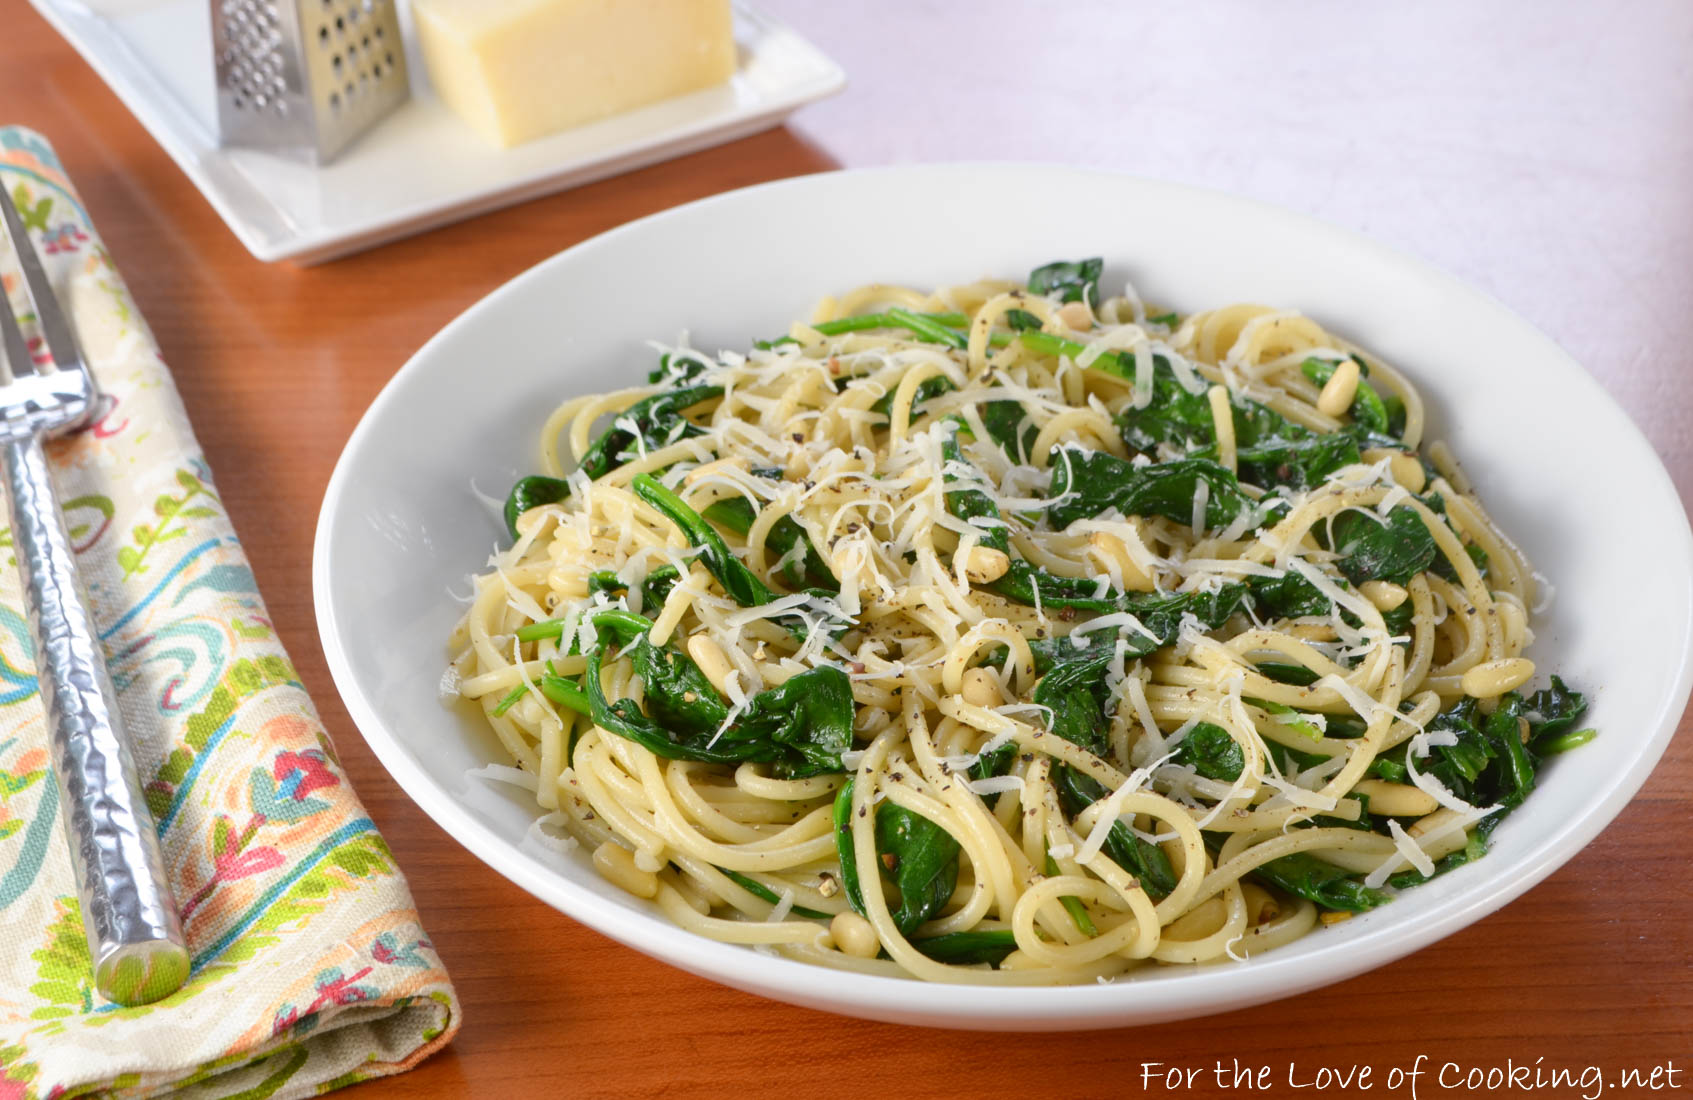 Spaghetti with Garlicky Spinach, Parmesan, and Toasted Pine Nuts